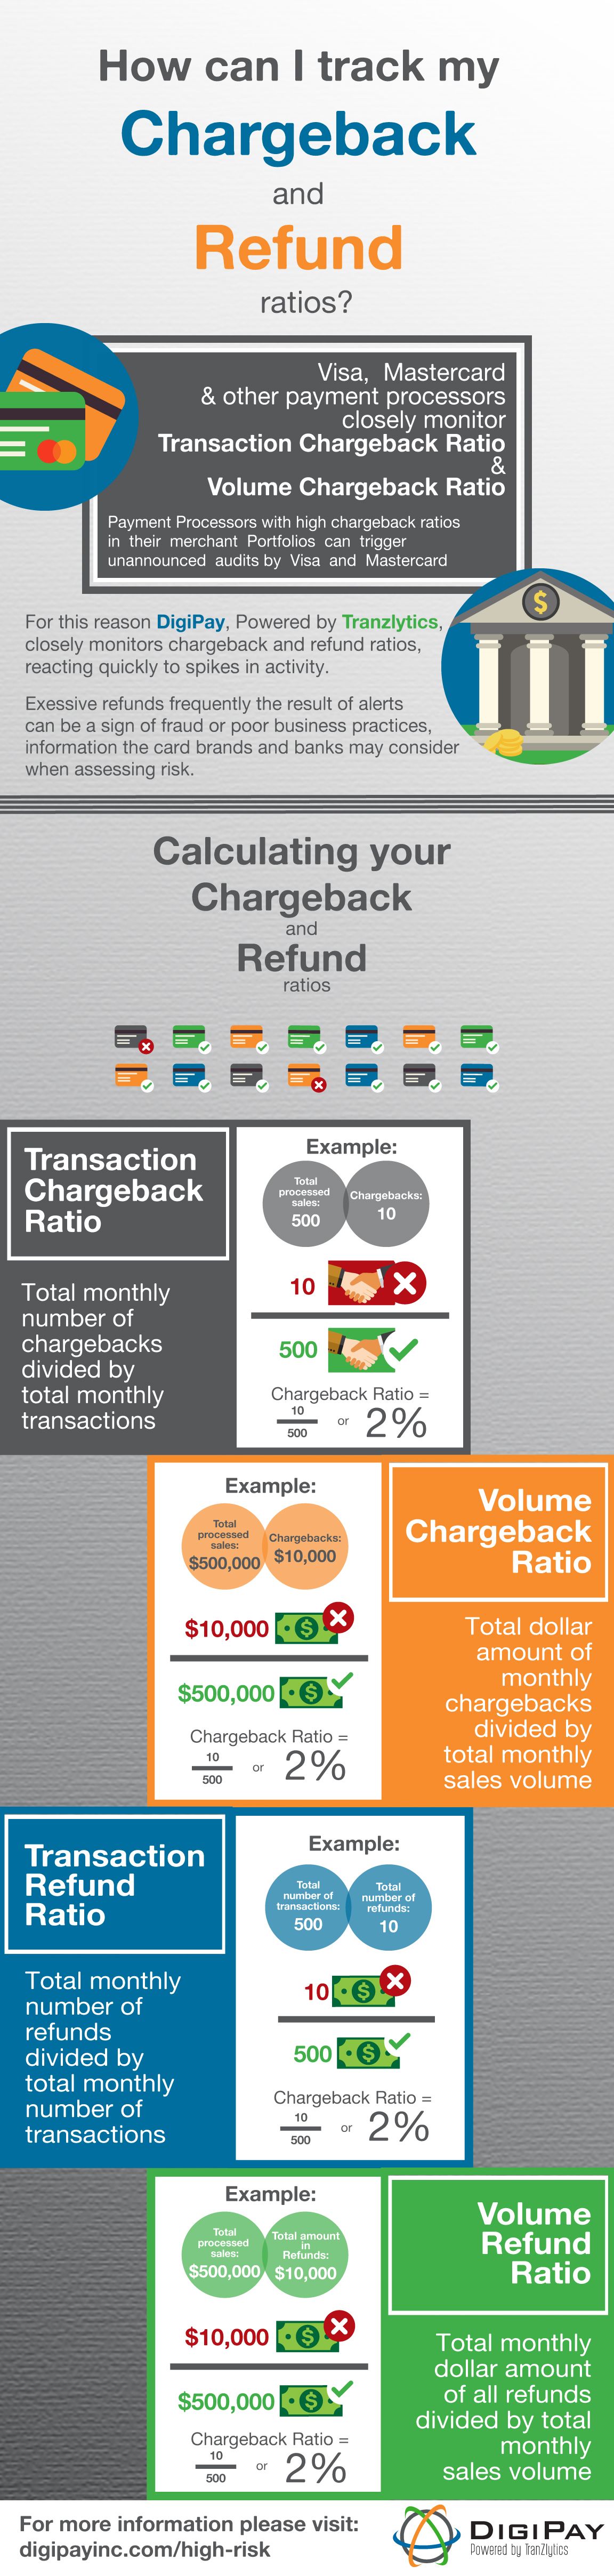 Calculate Your Chargeback Ratio